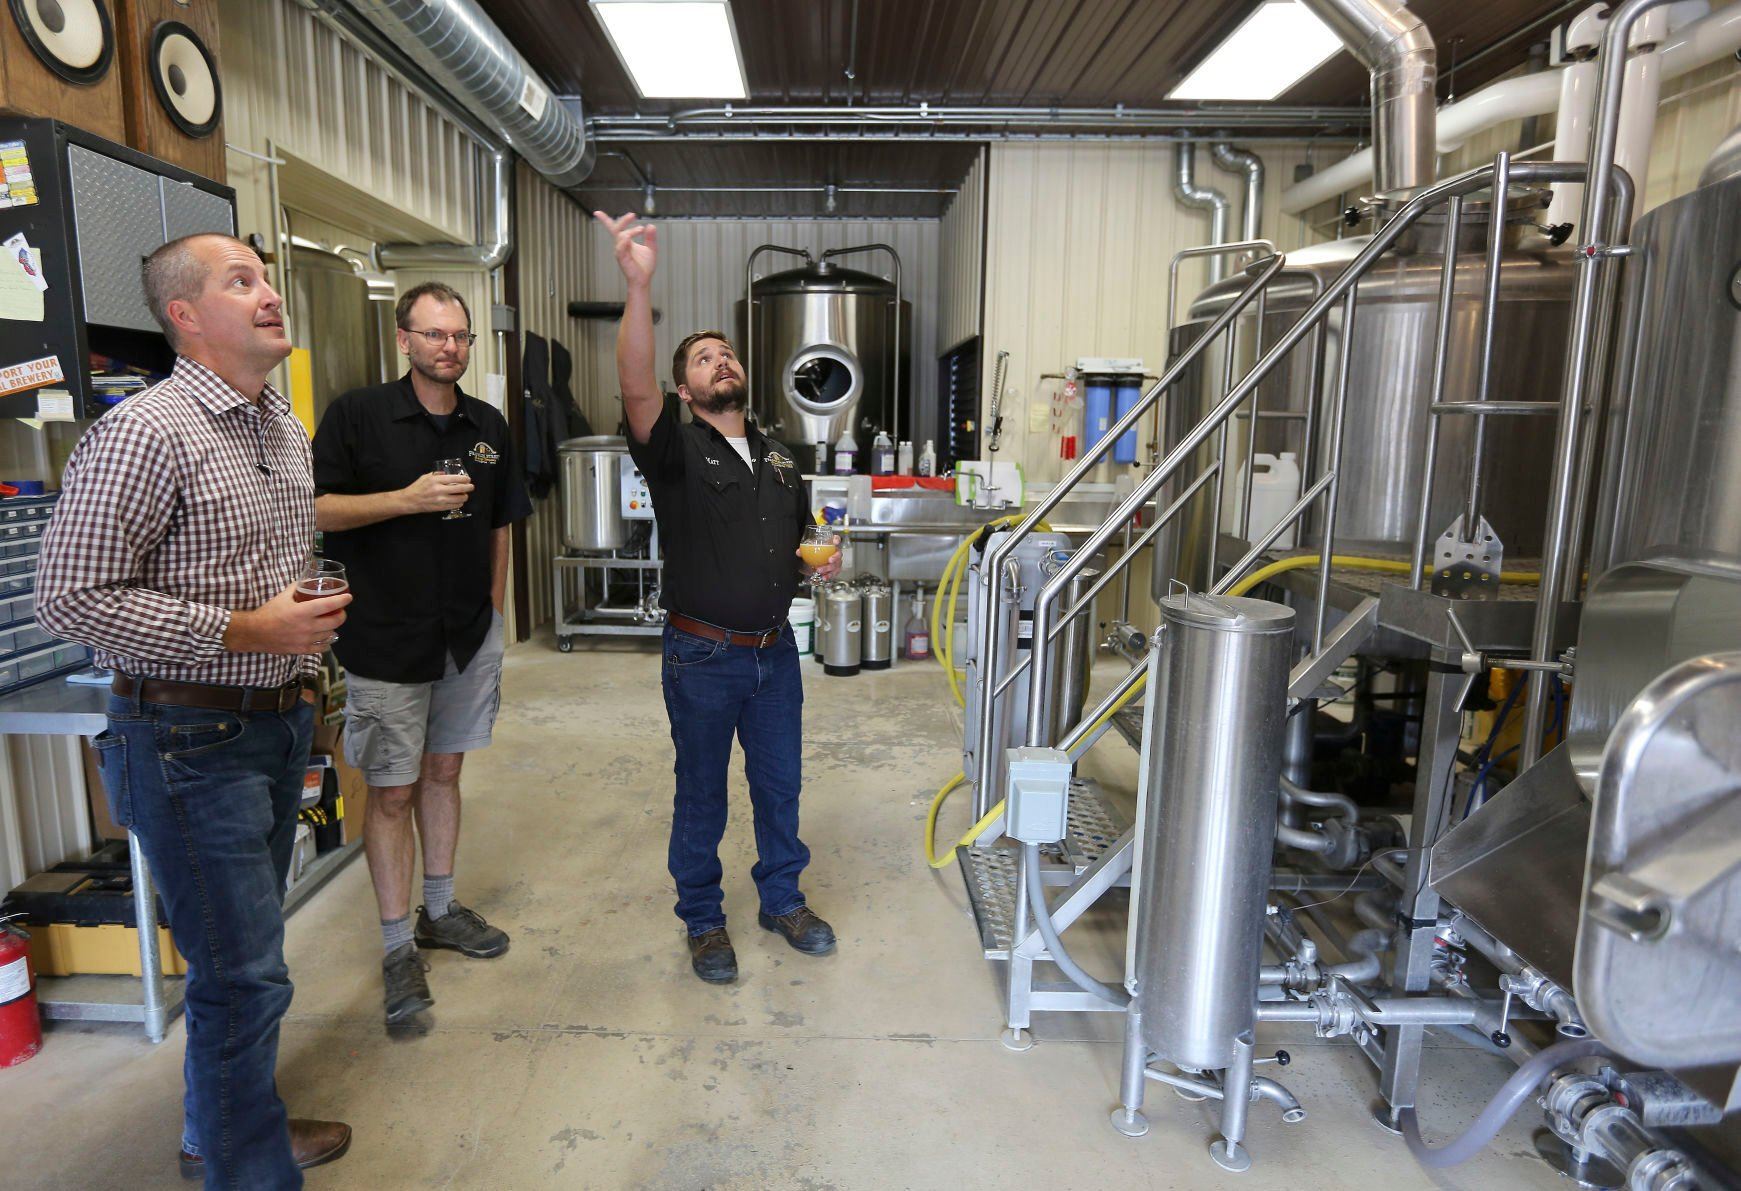 Iowa Secretary of Agriculture Mike Naig (left) listens to Franklin Street Brewing Co. brewmaster Matt Knutson (right) explain the brewing process during a tour of the facility in Manchester, Iowa, on Thursday. Company co-owner Kyle Sands also is pictured.    PHOTO CREDIT: Dave Kettering